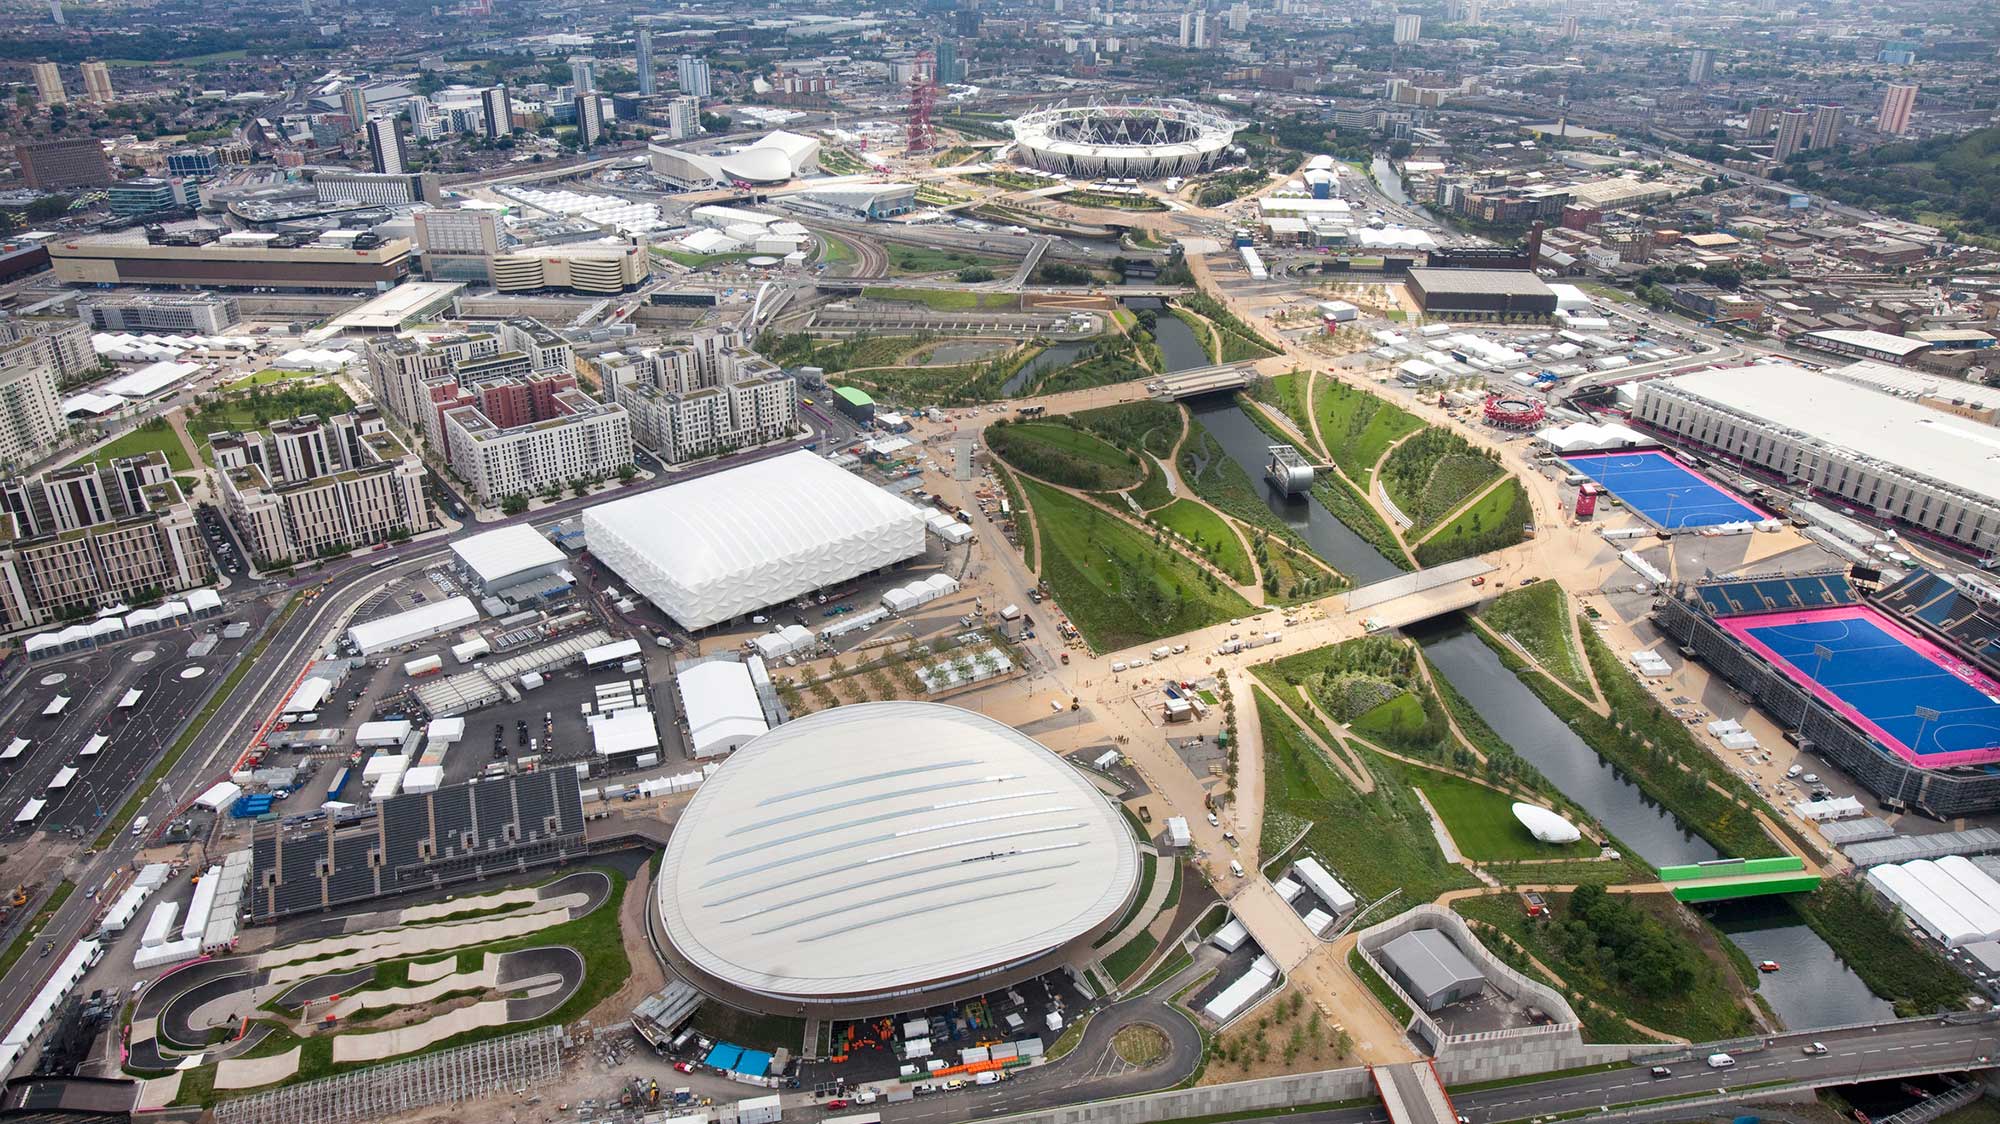 Stratford Olympic site from the air